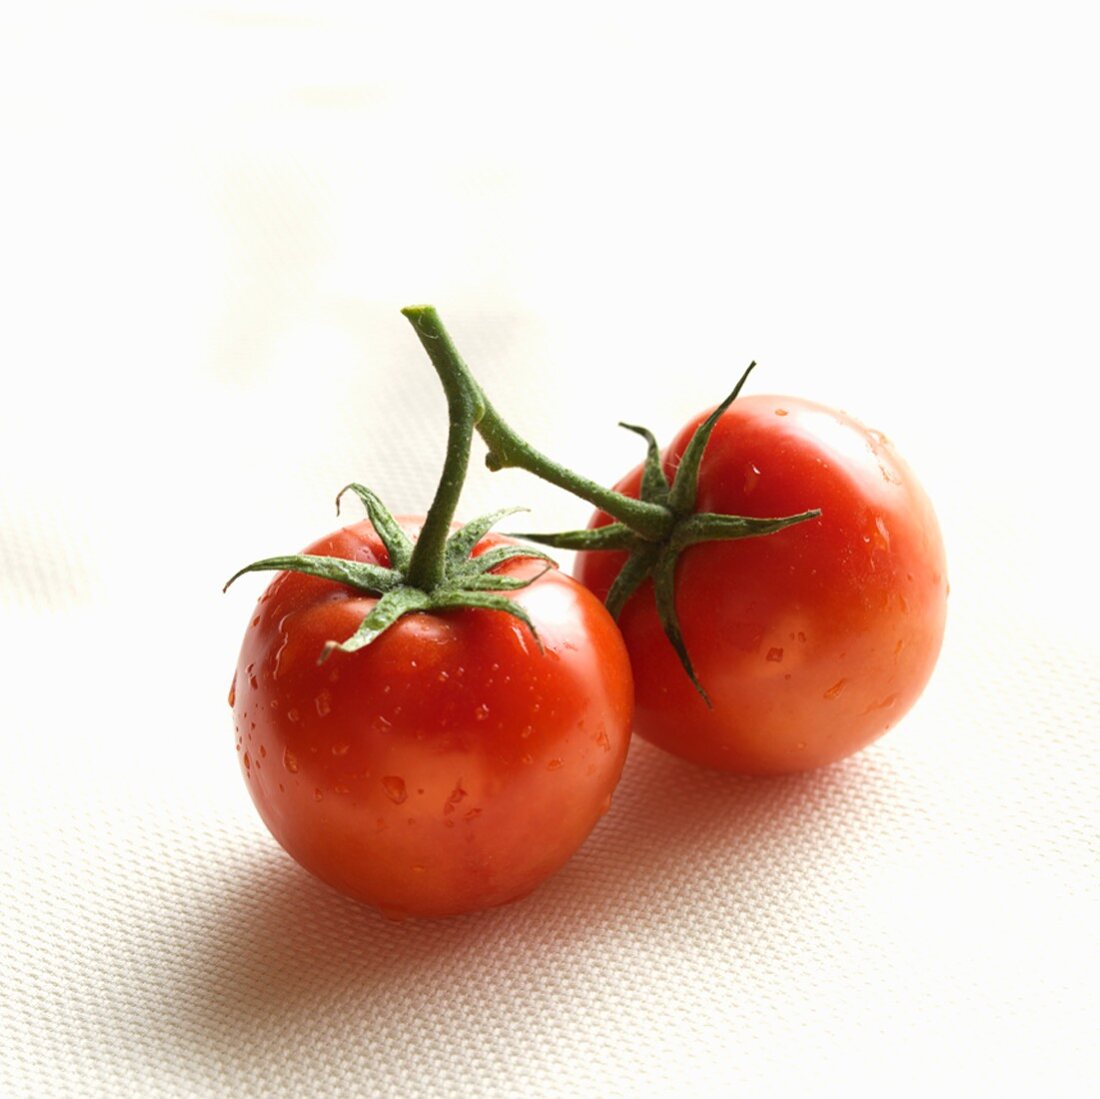 Two Red Tomatoes Connected at the Stem